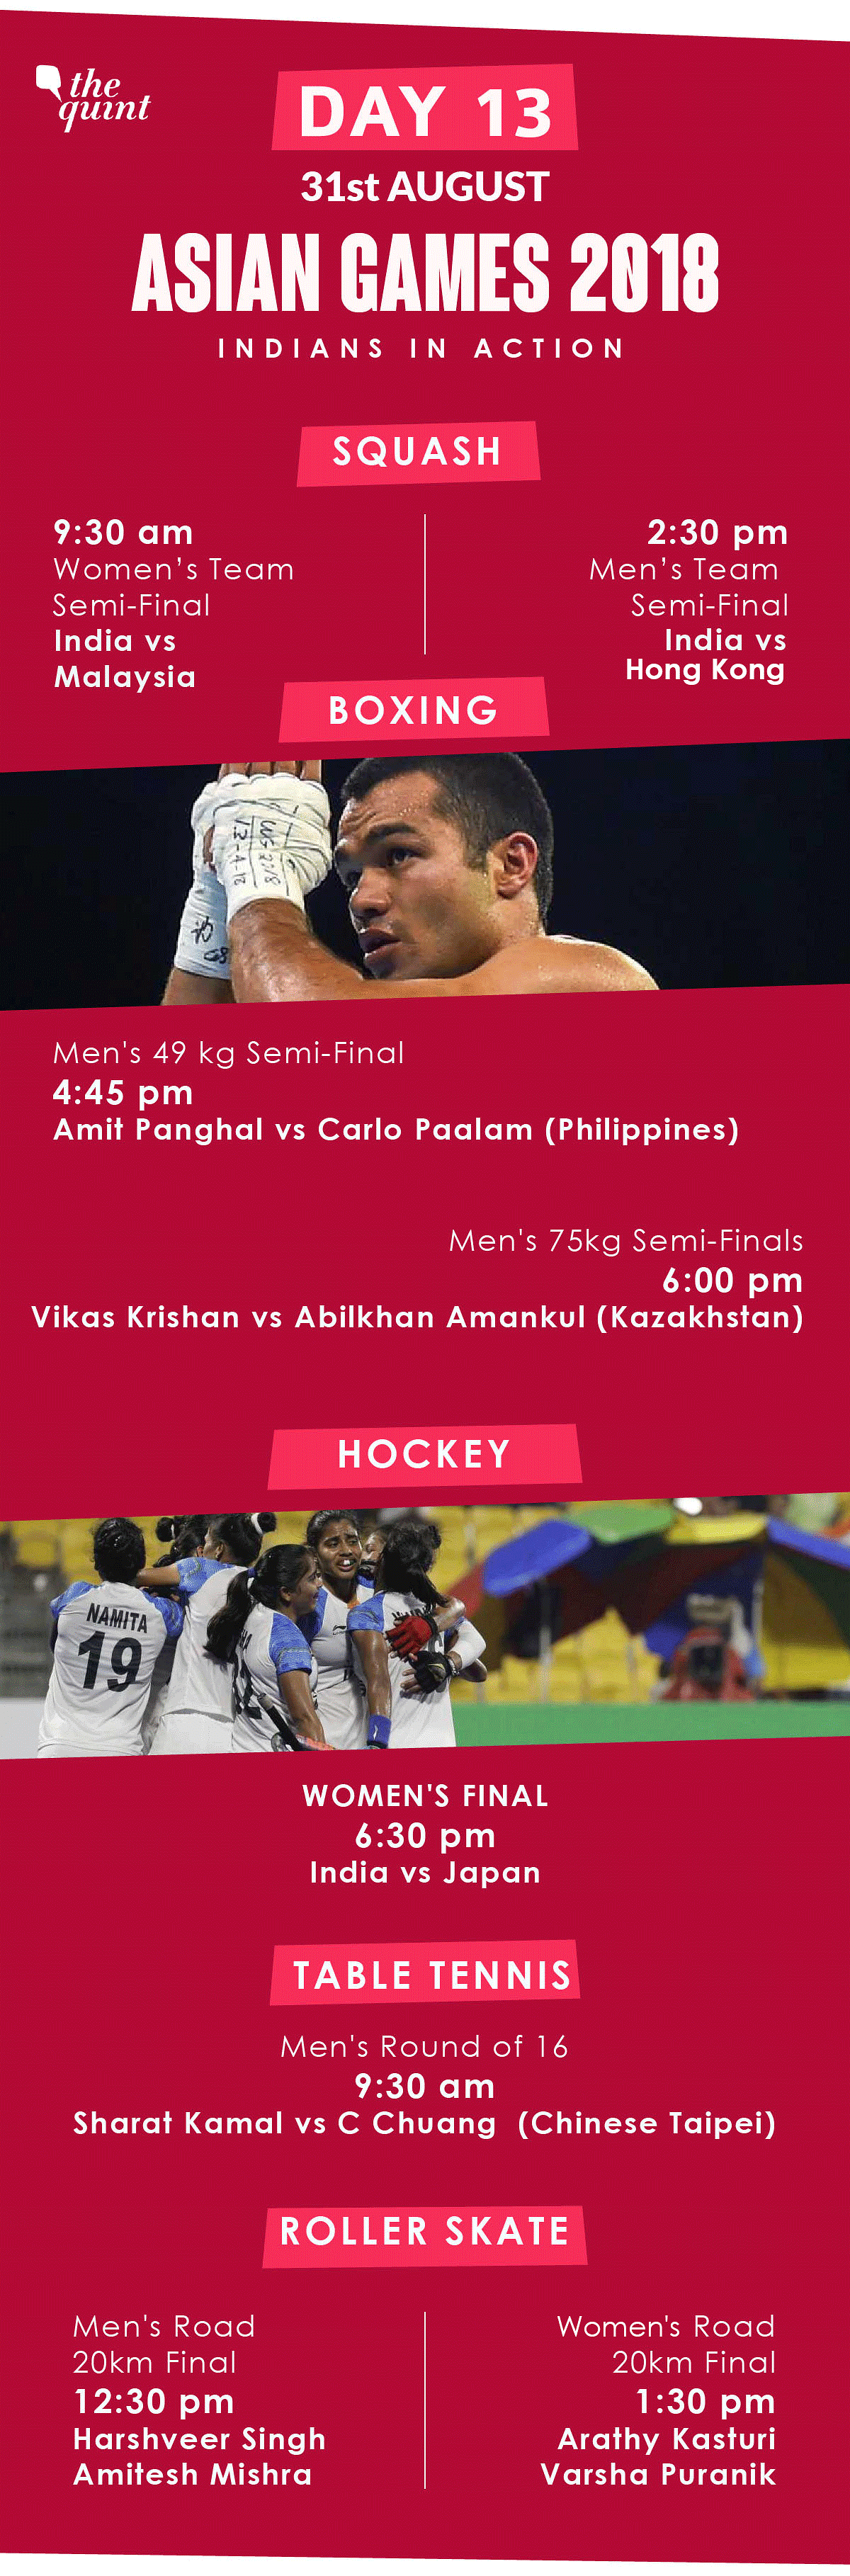  Here is the full schedule of Indians in actions on Day 13 of Asian Games.